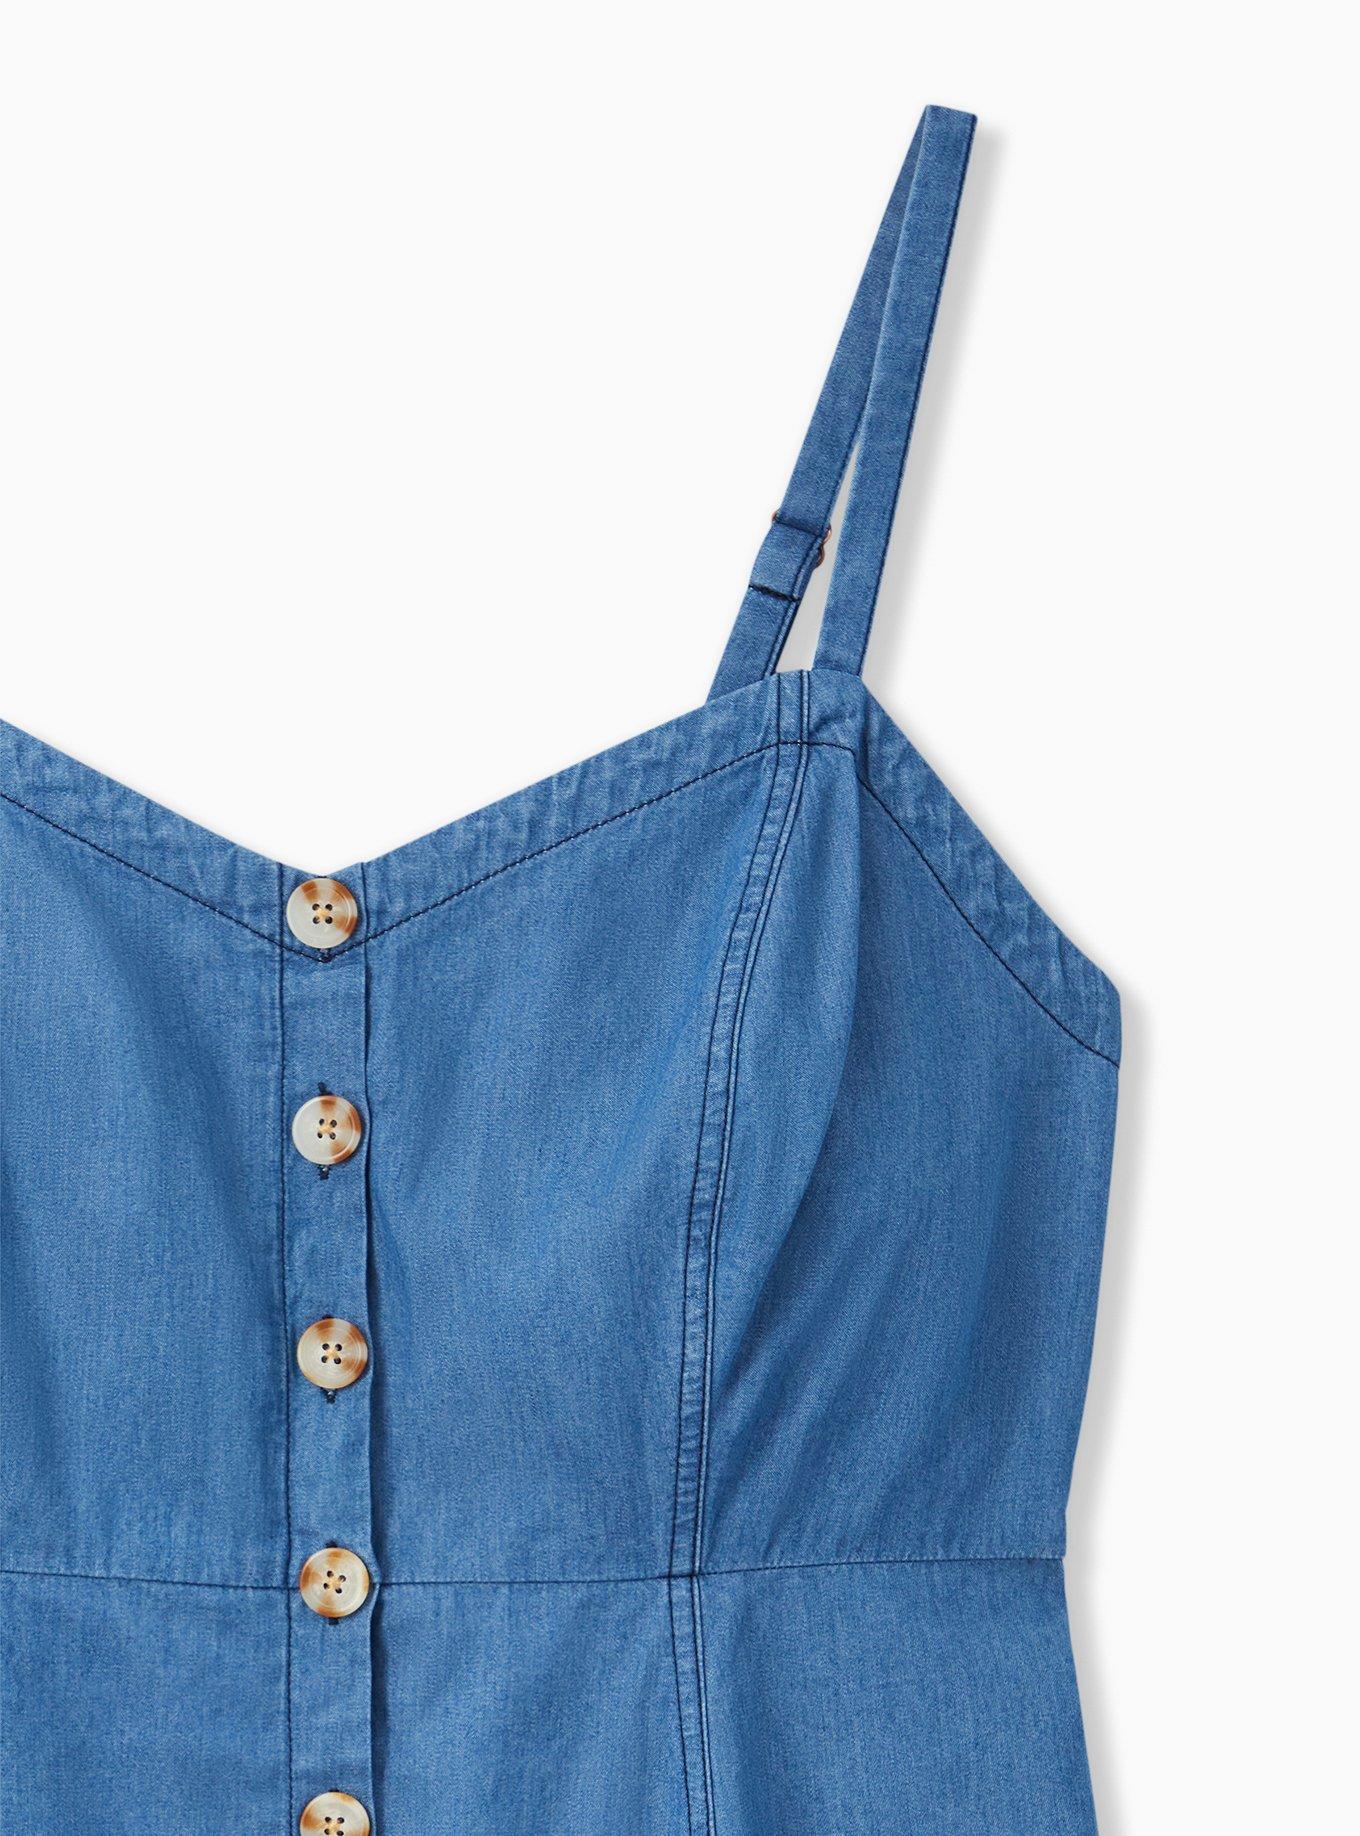 Plus Size - Blue Chambray Button Fit & Flare Cami - Torrid